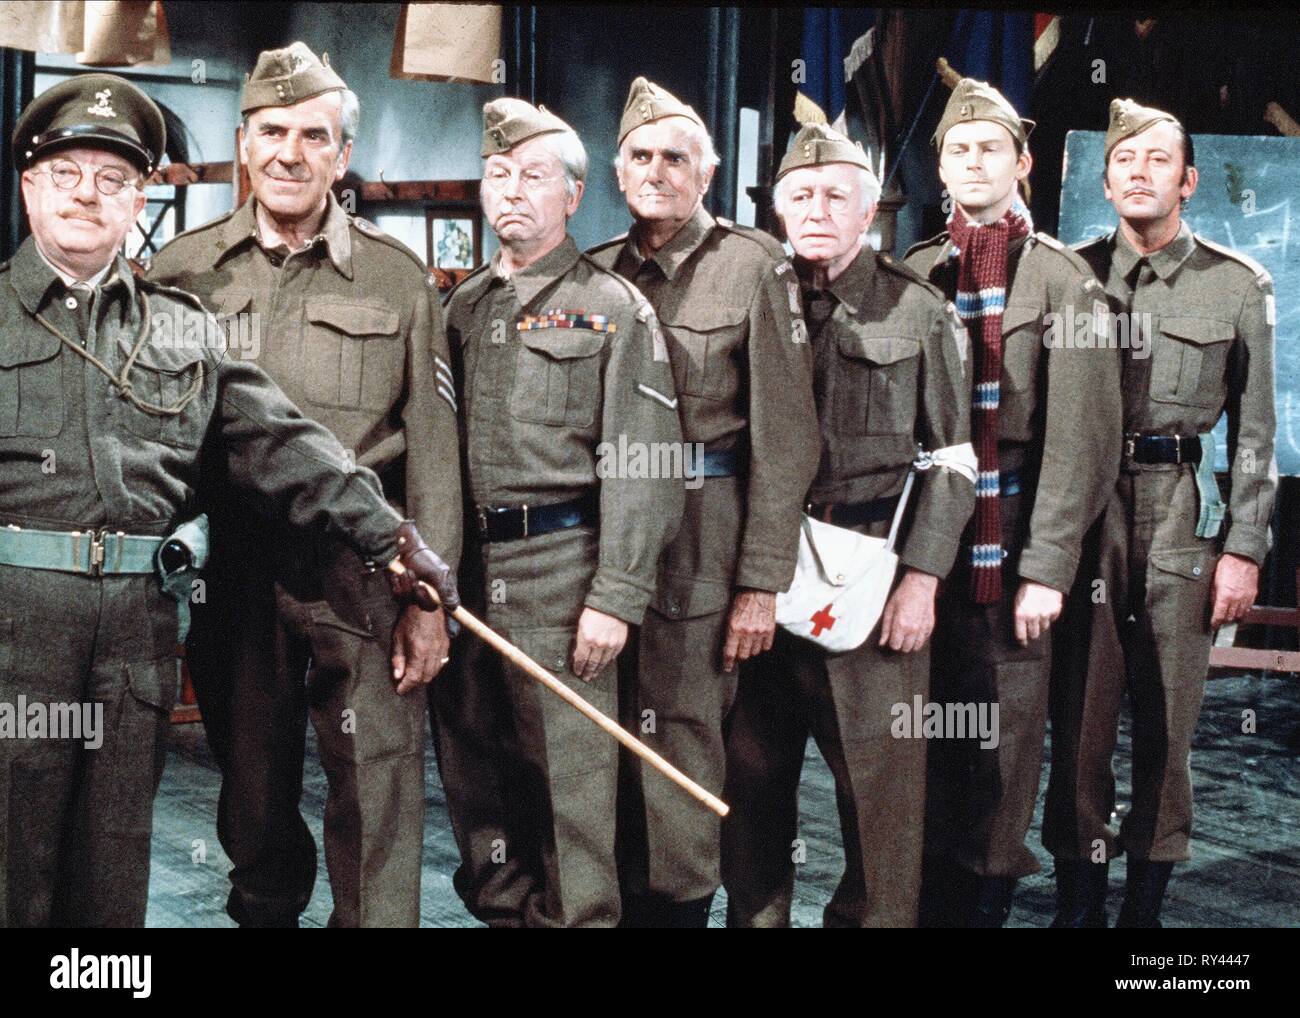 LOWE,MESURIER,DUNN,LAURIE,RIDLEY,LAVINDER,BECK, DAD'S ARMY, 1971 Stock Photo